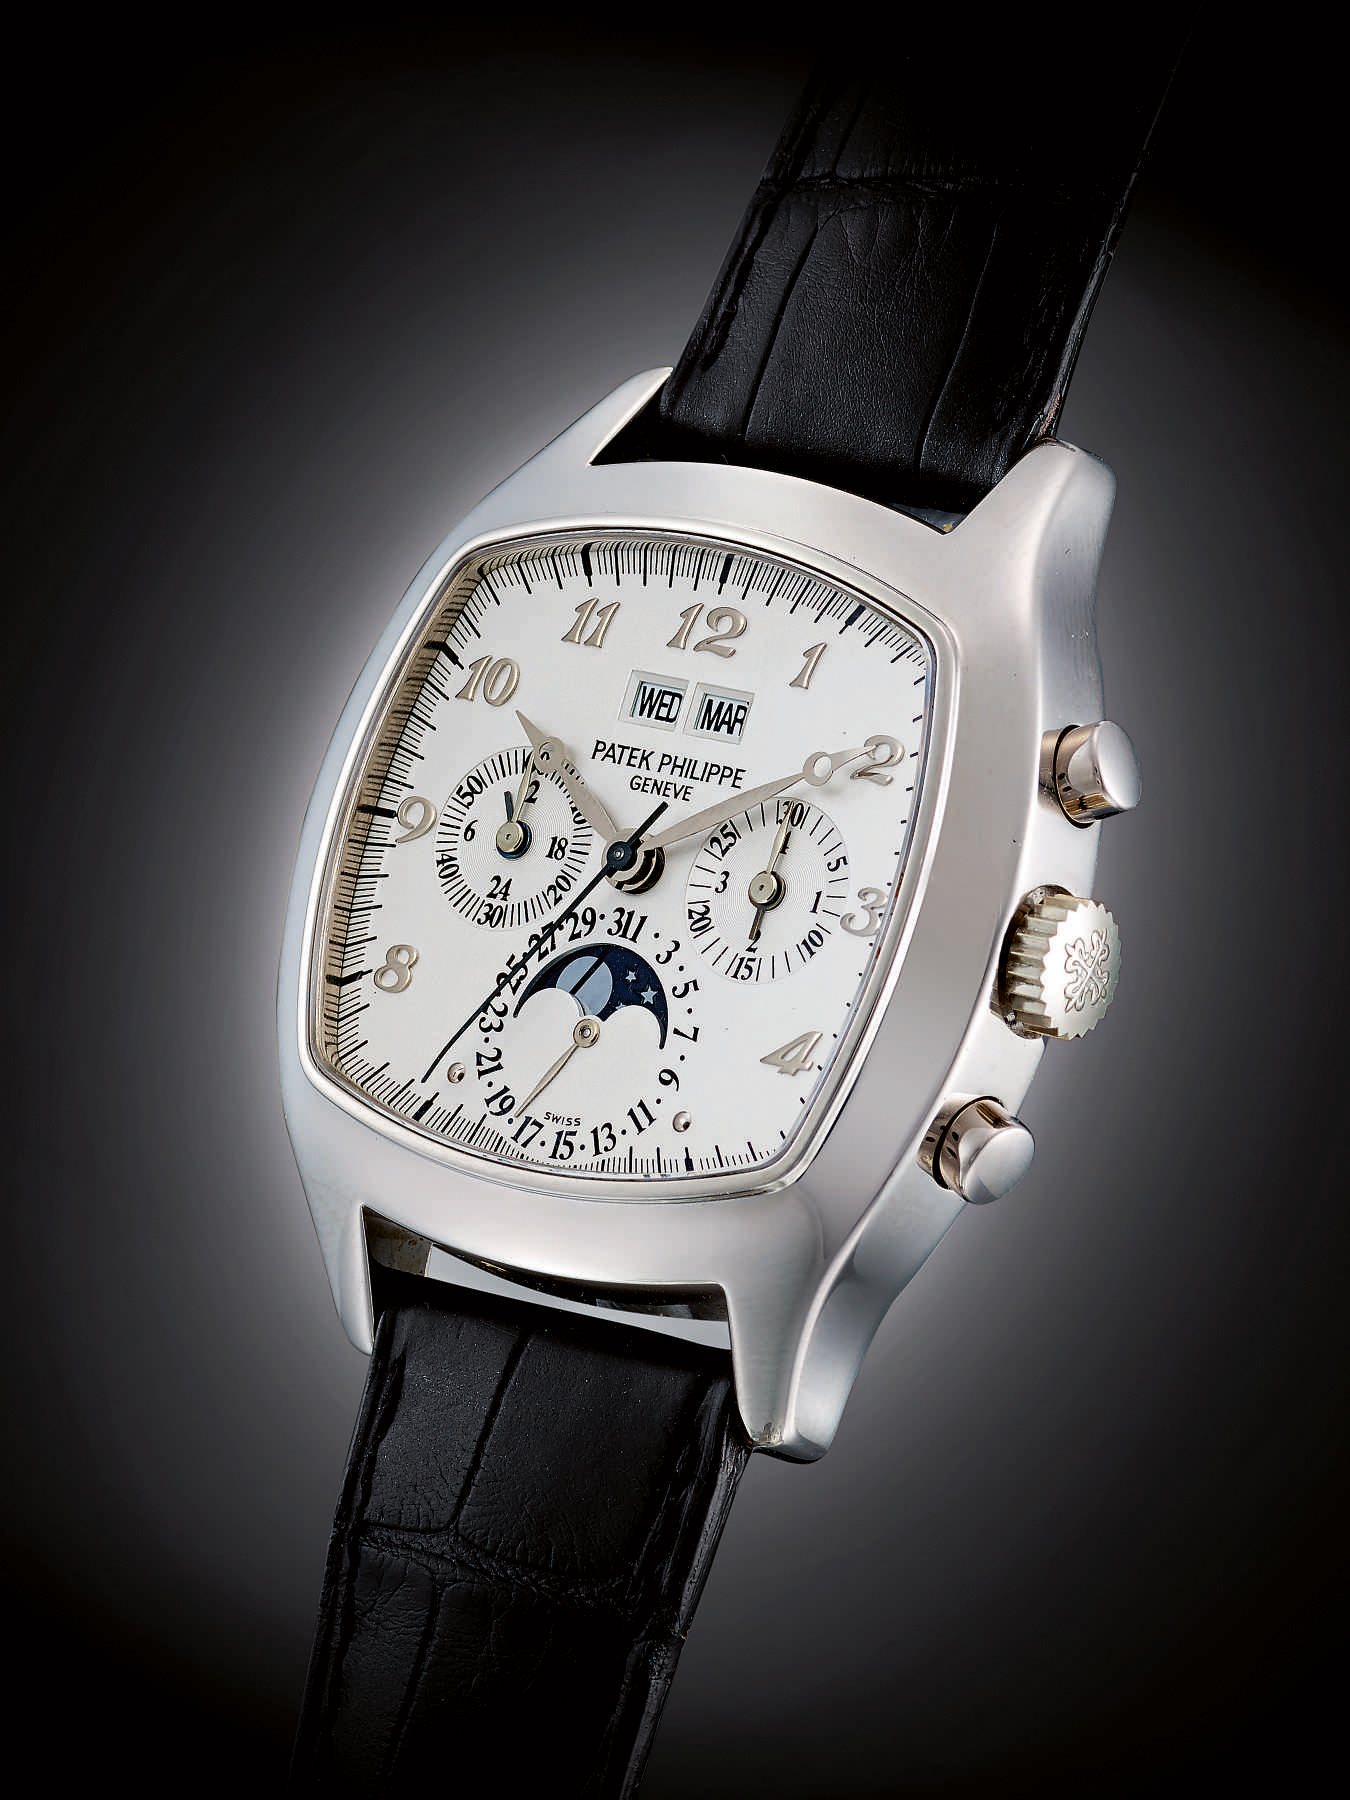 A Fine And Very Rare White Gold Cushion-Form Perpetual Calendar Chronograph Wristwatch With Moon-Phases, Registers And Breguet Numerals Ref 5020g-013 Mvt 3046211 Case 2994144 Circa 2001